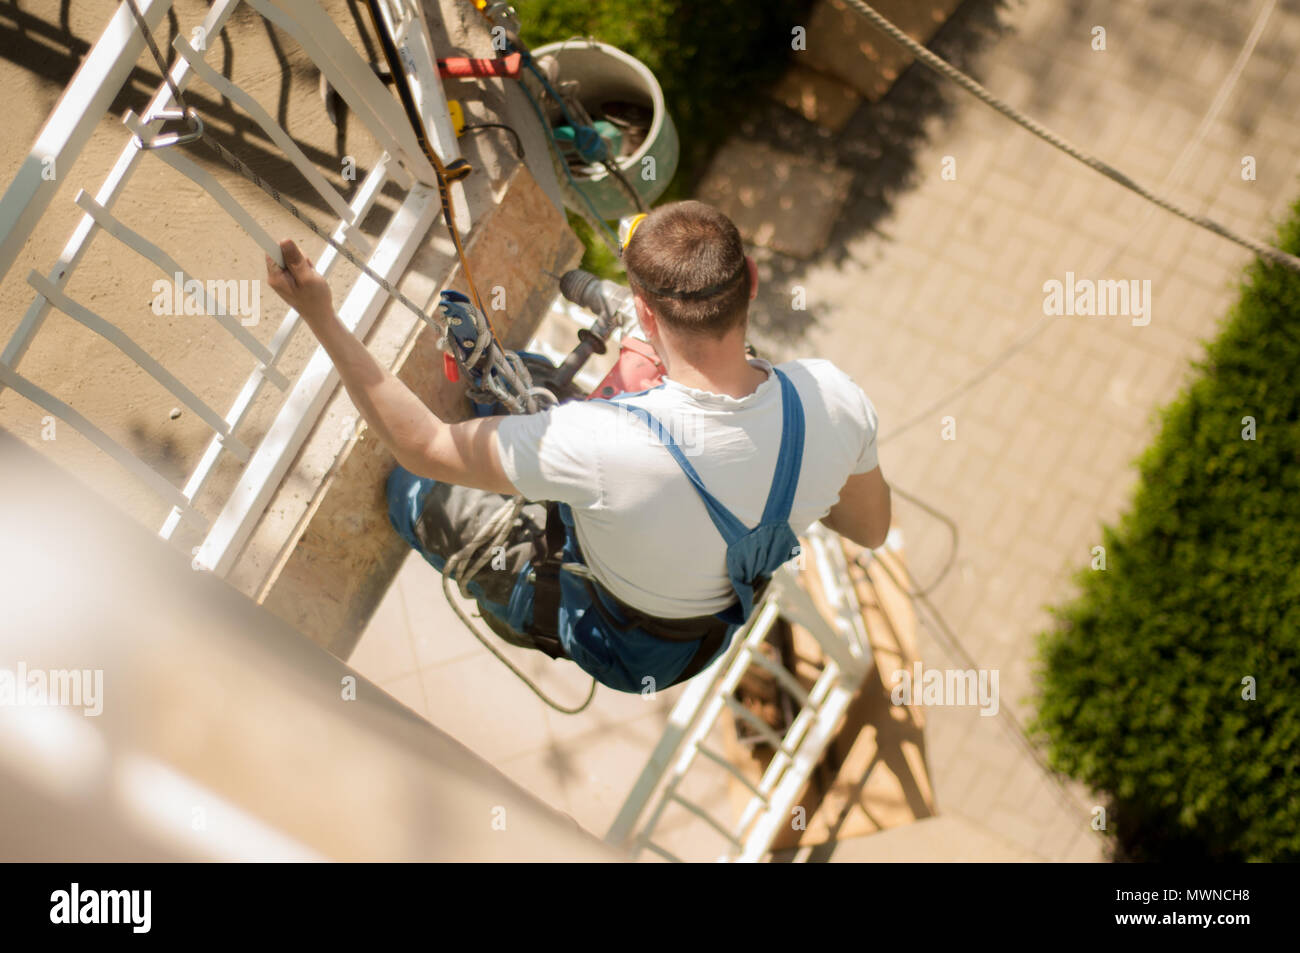 Industrial climber at work Stock Photo